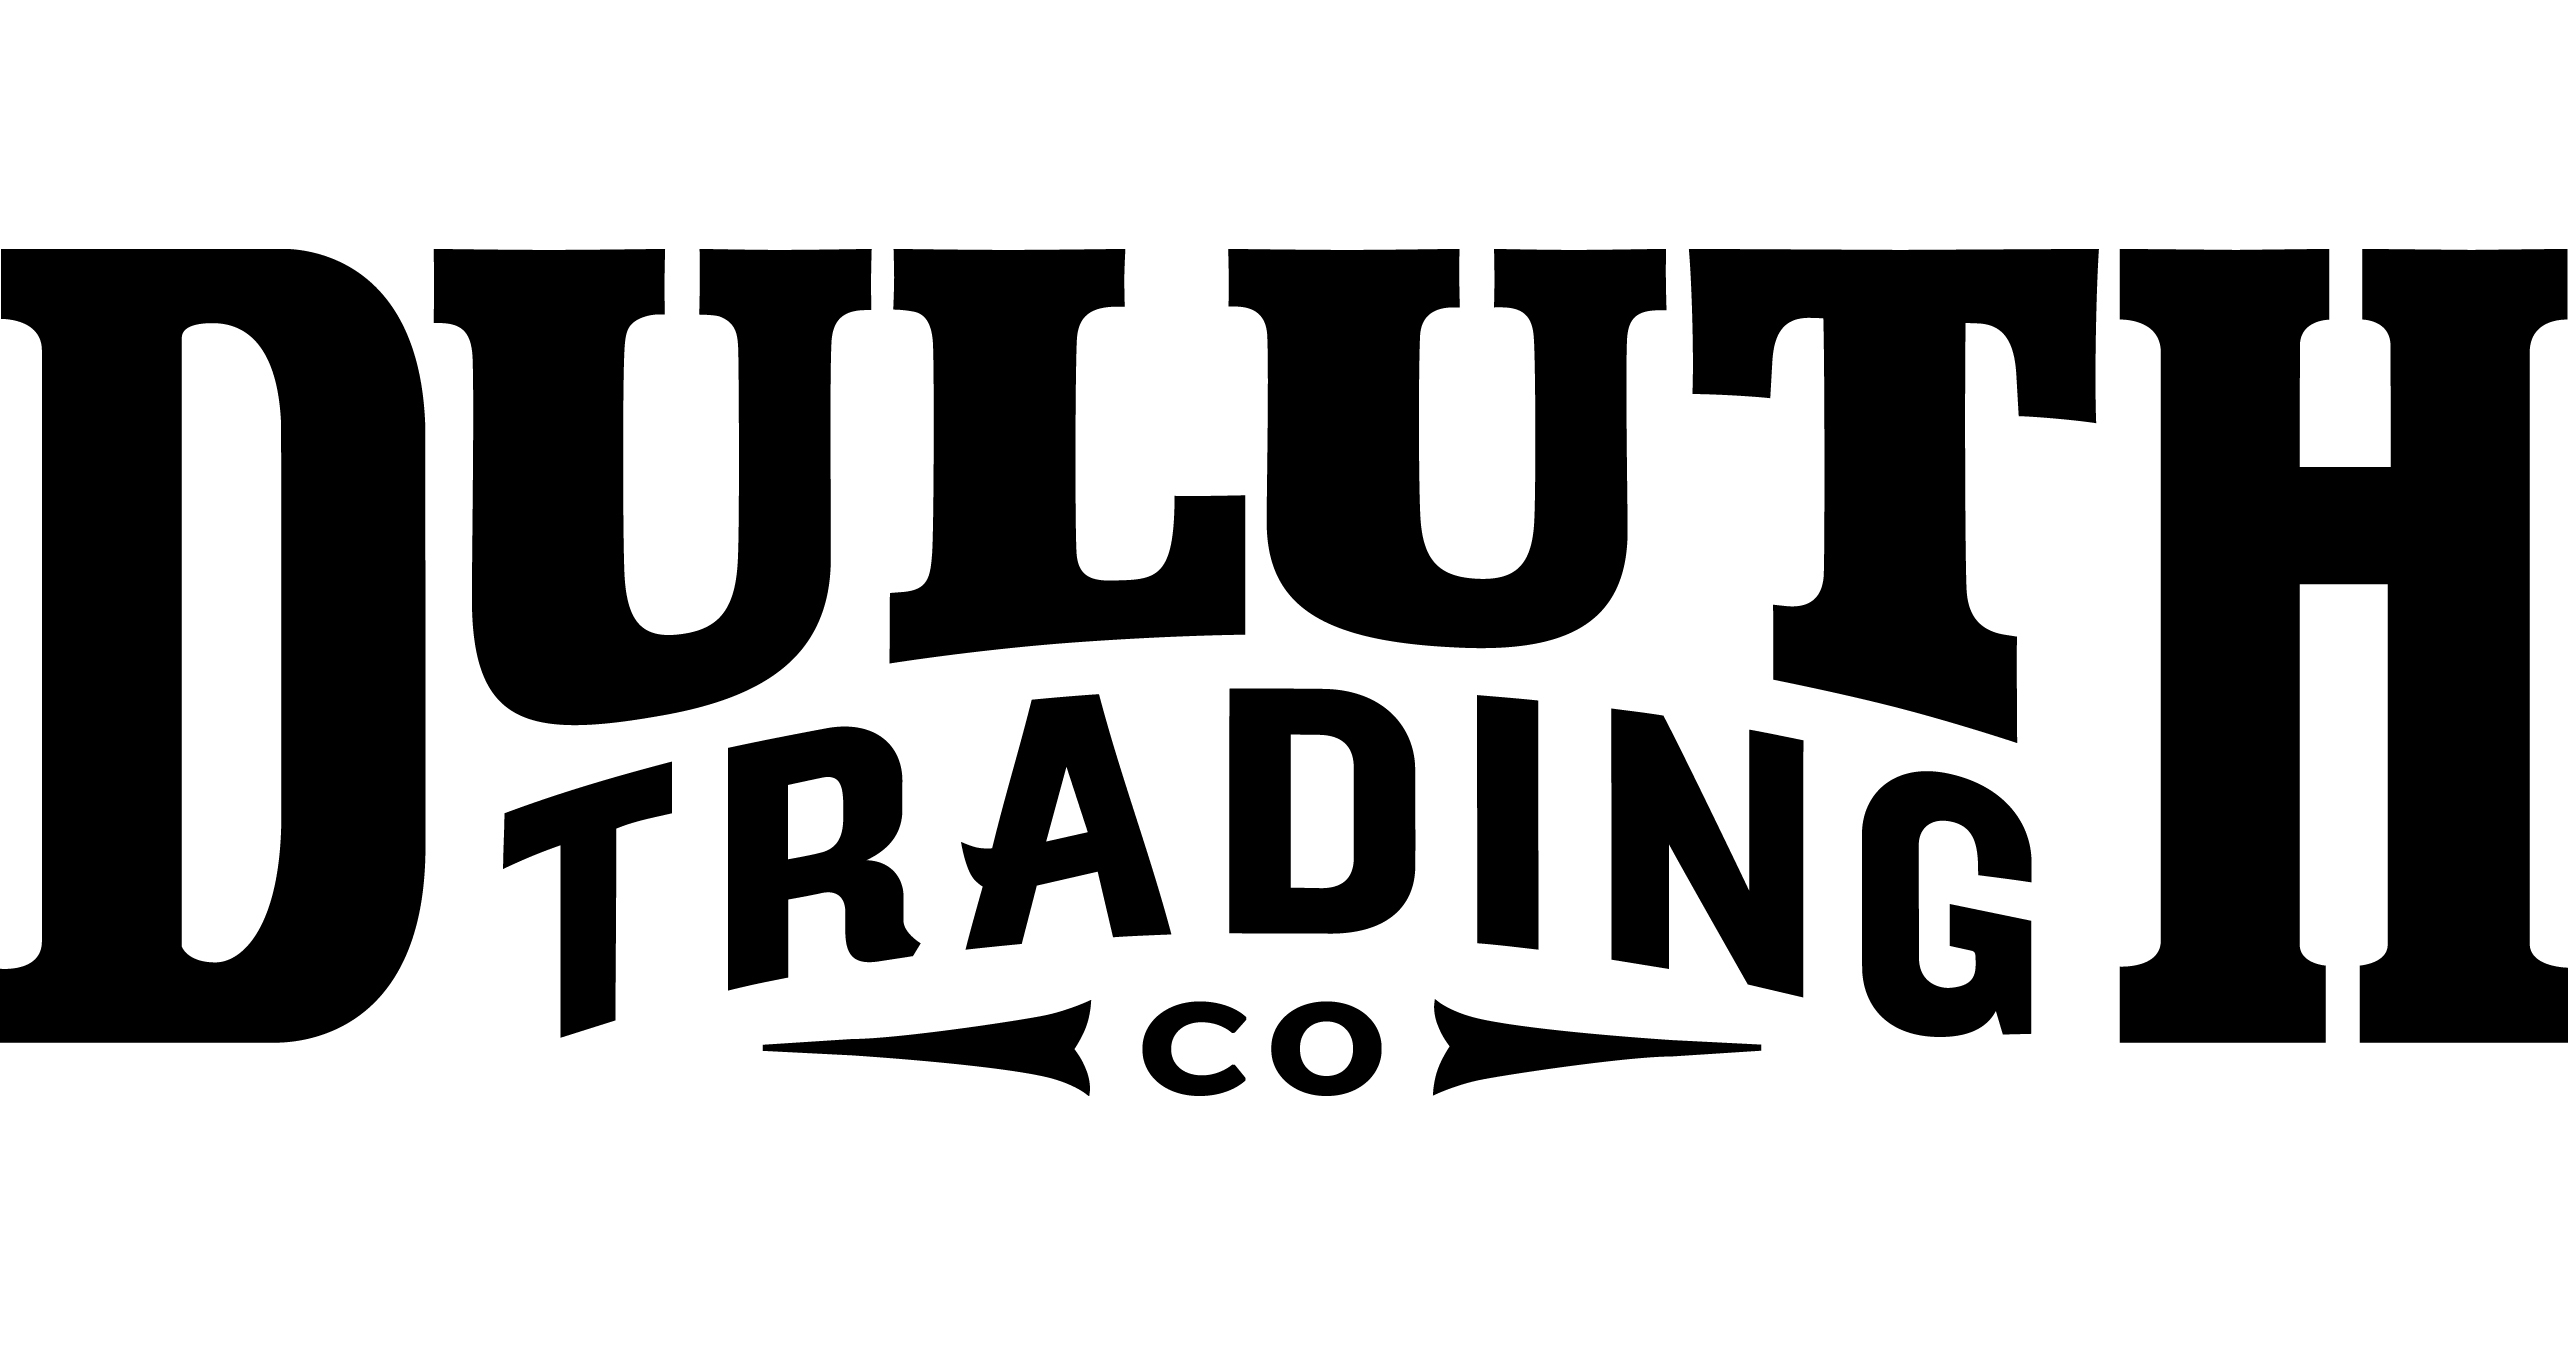 Duluth Trading Co. Creates First-Ever Museum of Man Area & Underwear Shop